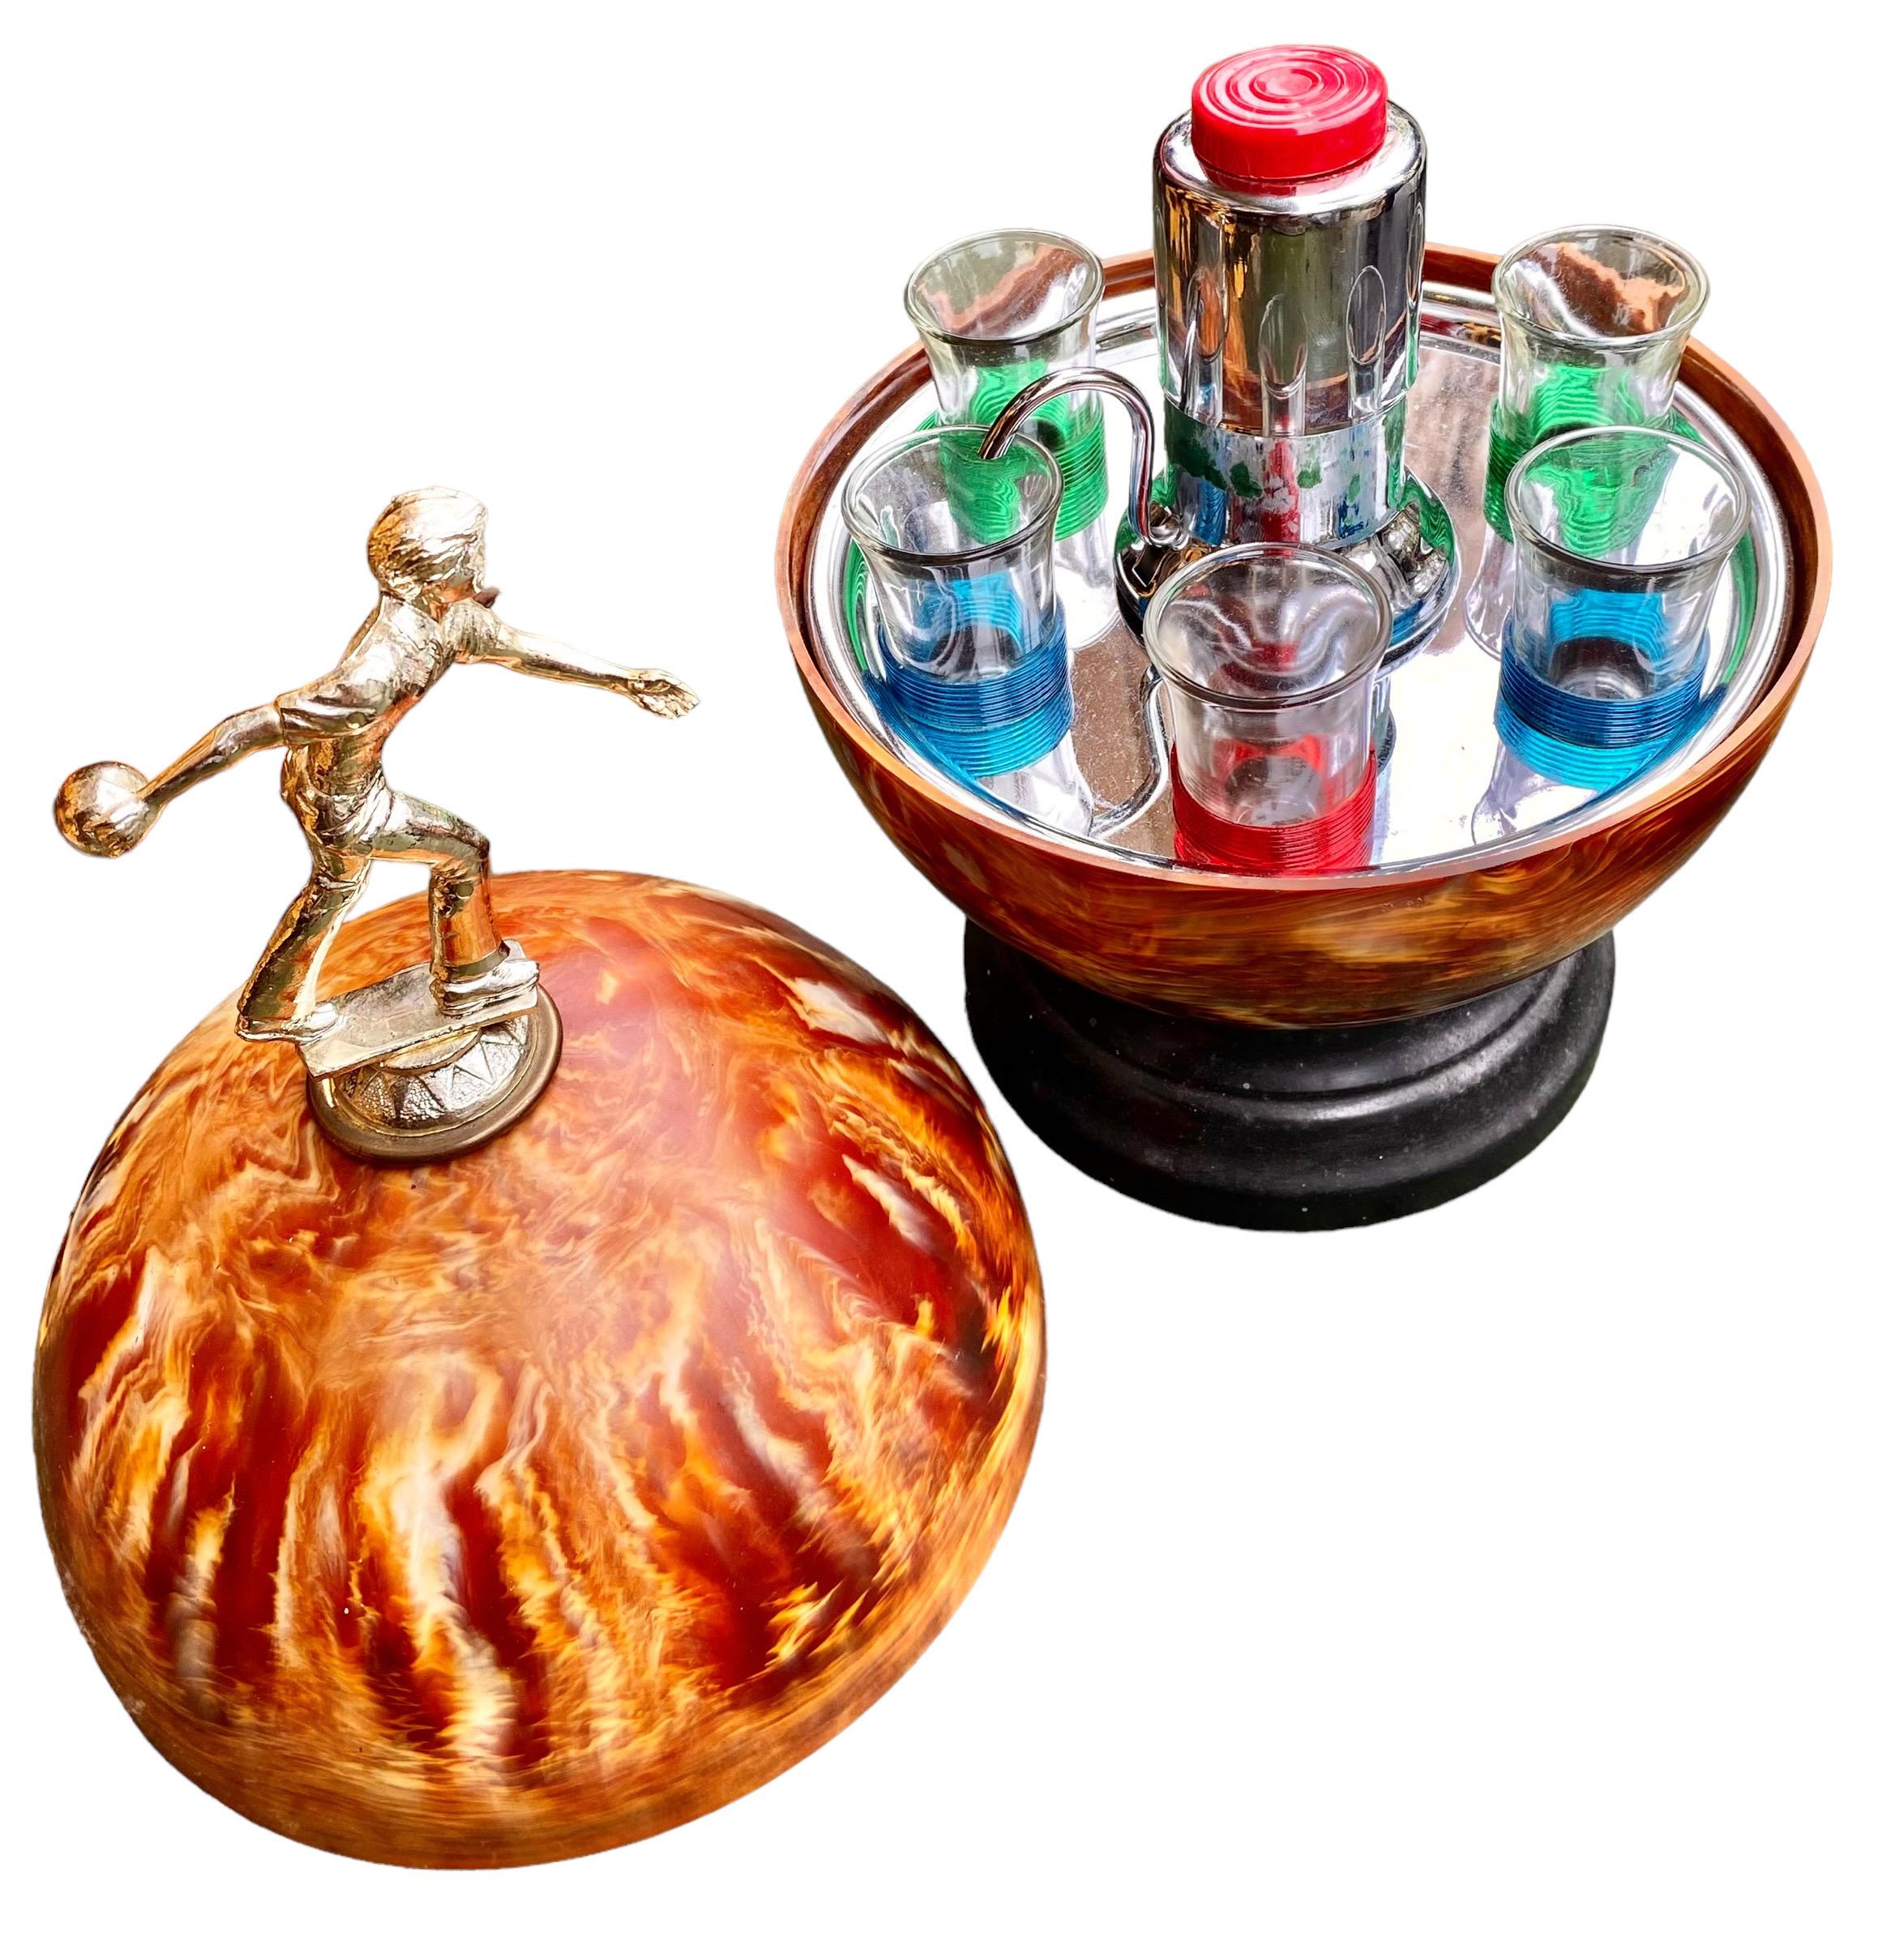 A truly unique Mid-Century Modern bowling ball/liquor dispensing bowling trophy. A very rare find!
The top half of the ball lifts off to reveal a Merry-Go-Round style liquor dispensing pump and 6 colorfully accented art glass shot